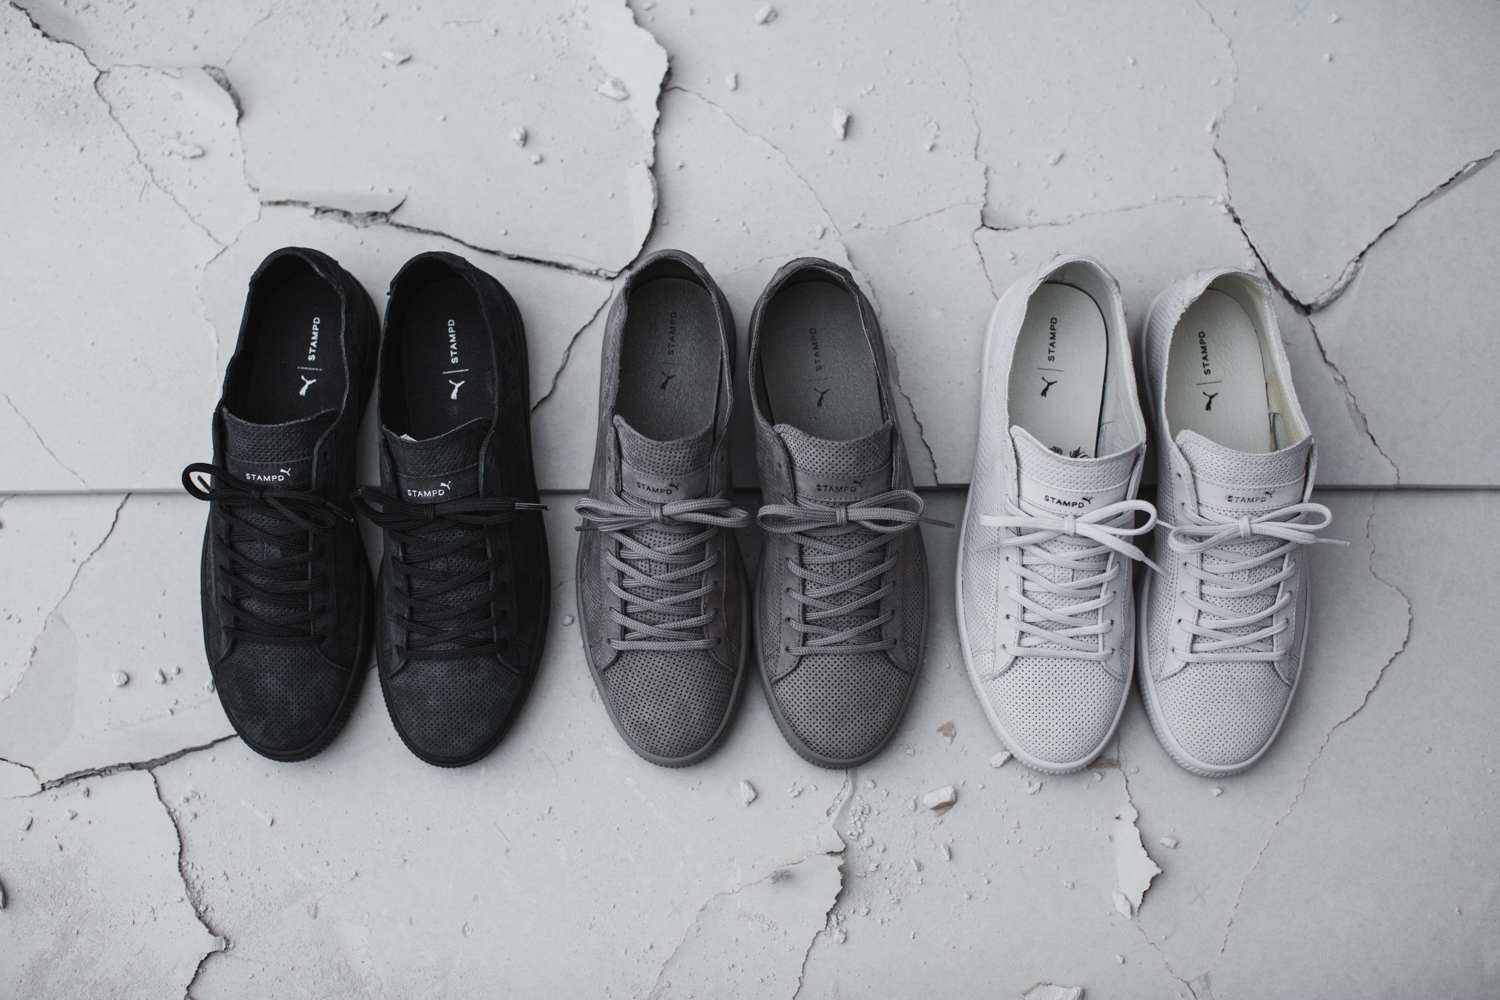 Stampd x PUMA ”96 Hours” Summer Collection